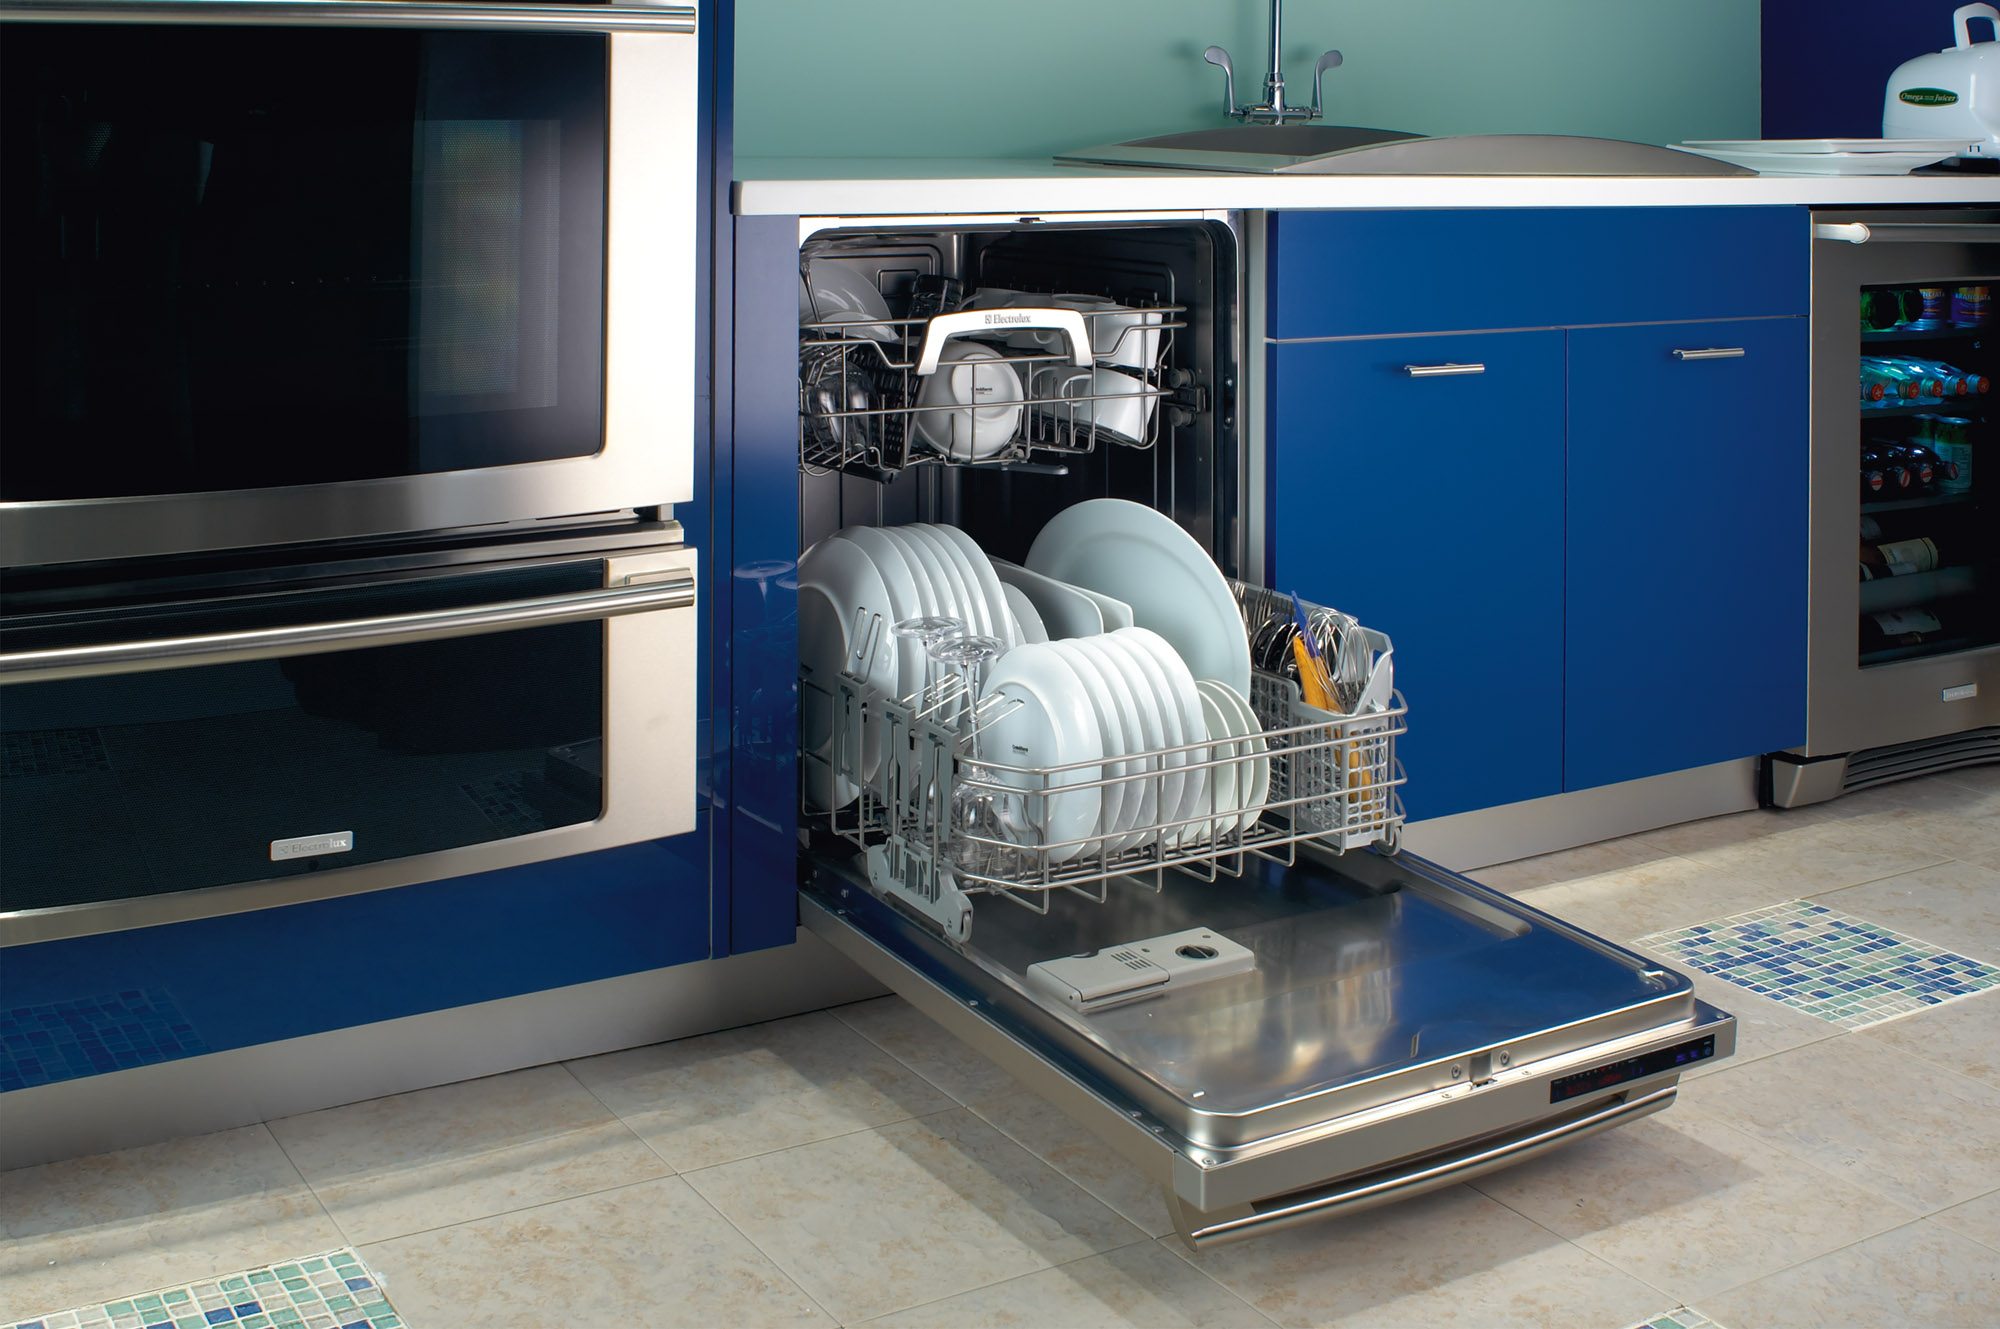 The Electrolux Dishwasher You Won’t Ever Hear